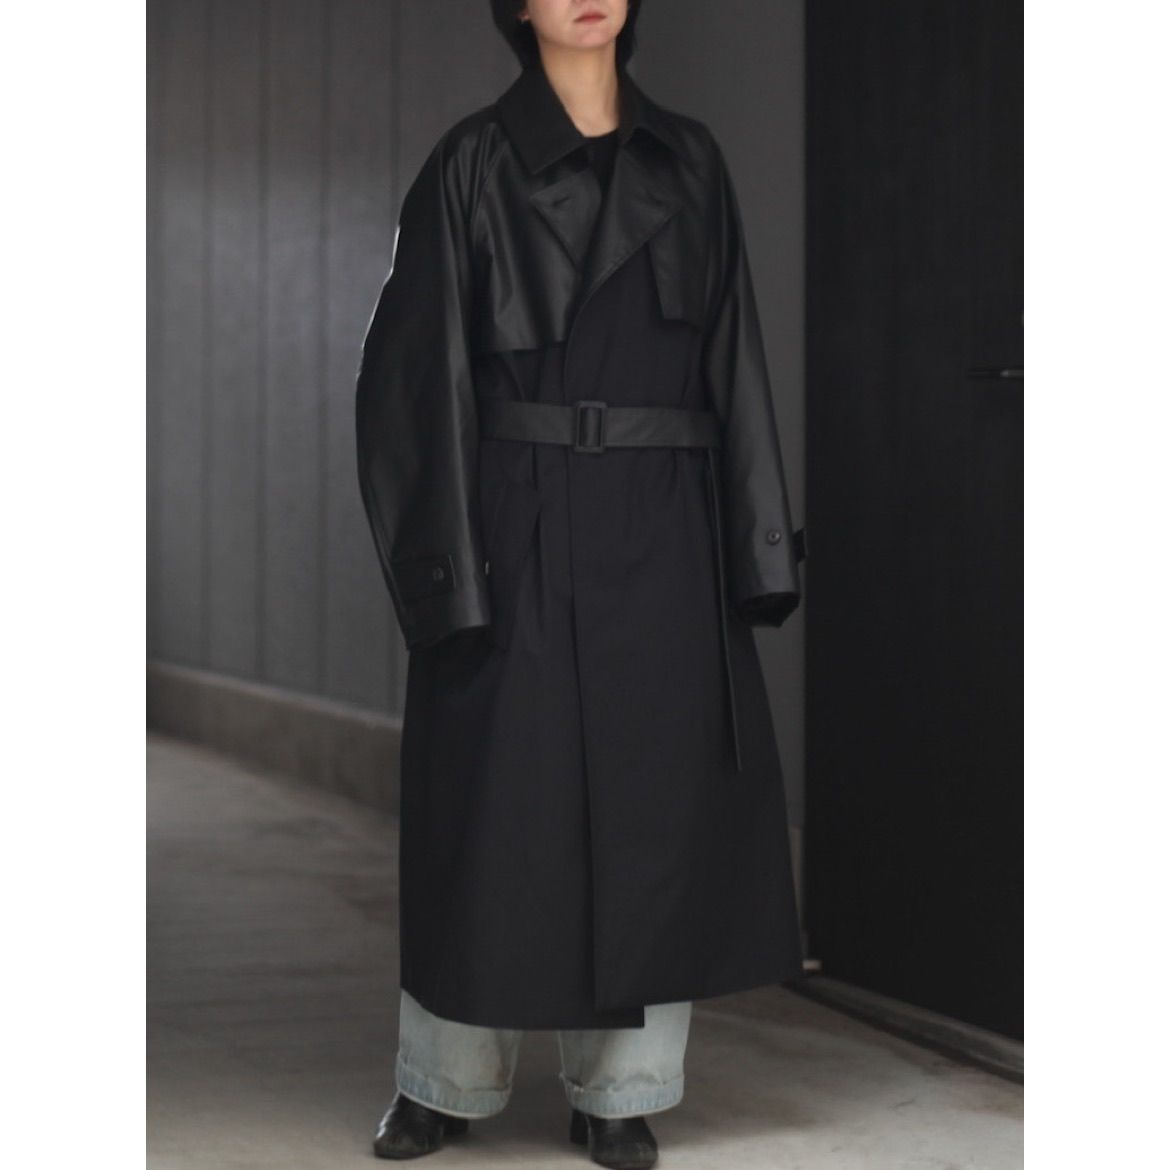 stein - 【残りわずか】Contrast Single Breasted Wide Lapels Coat 